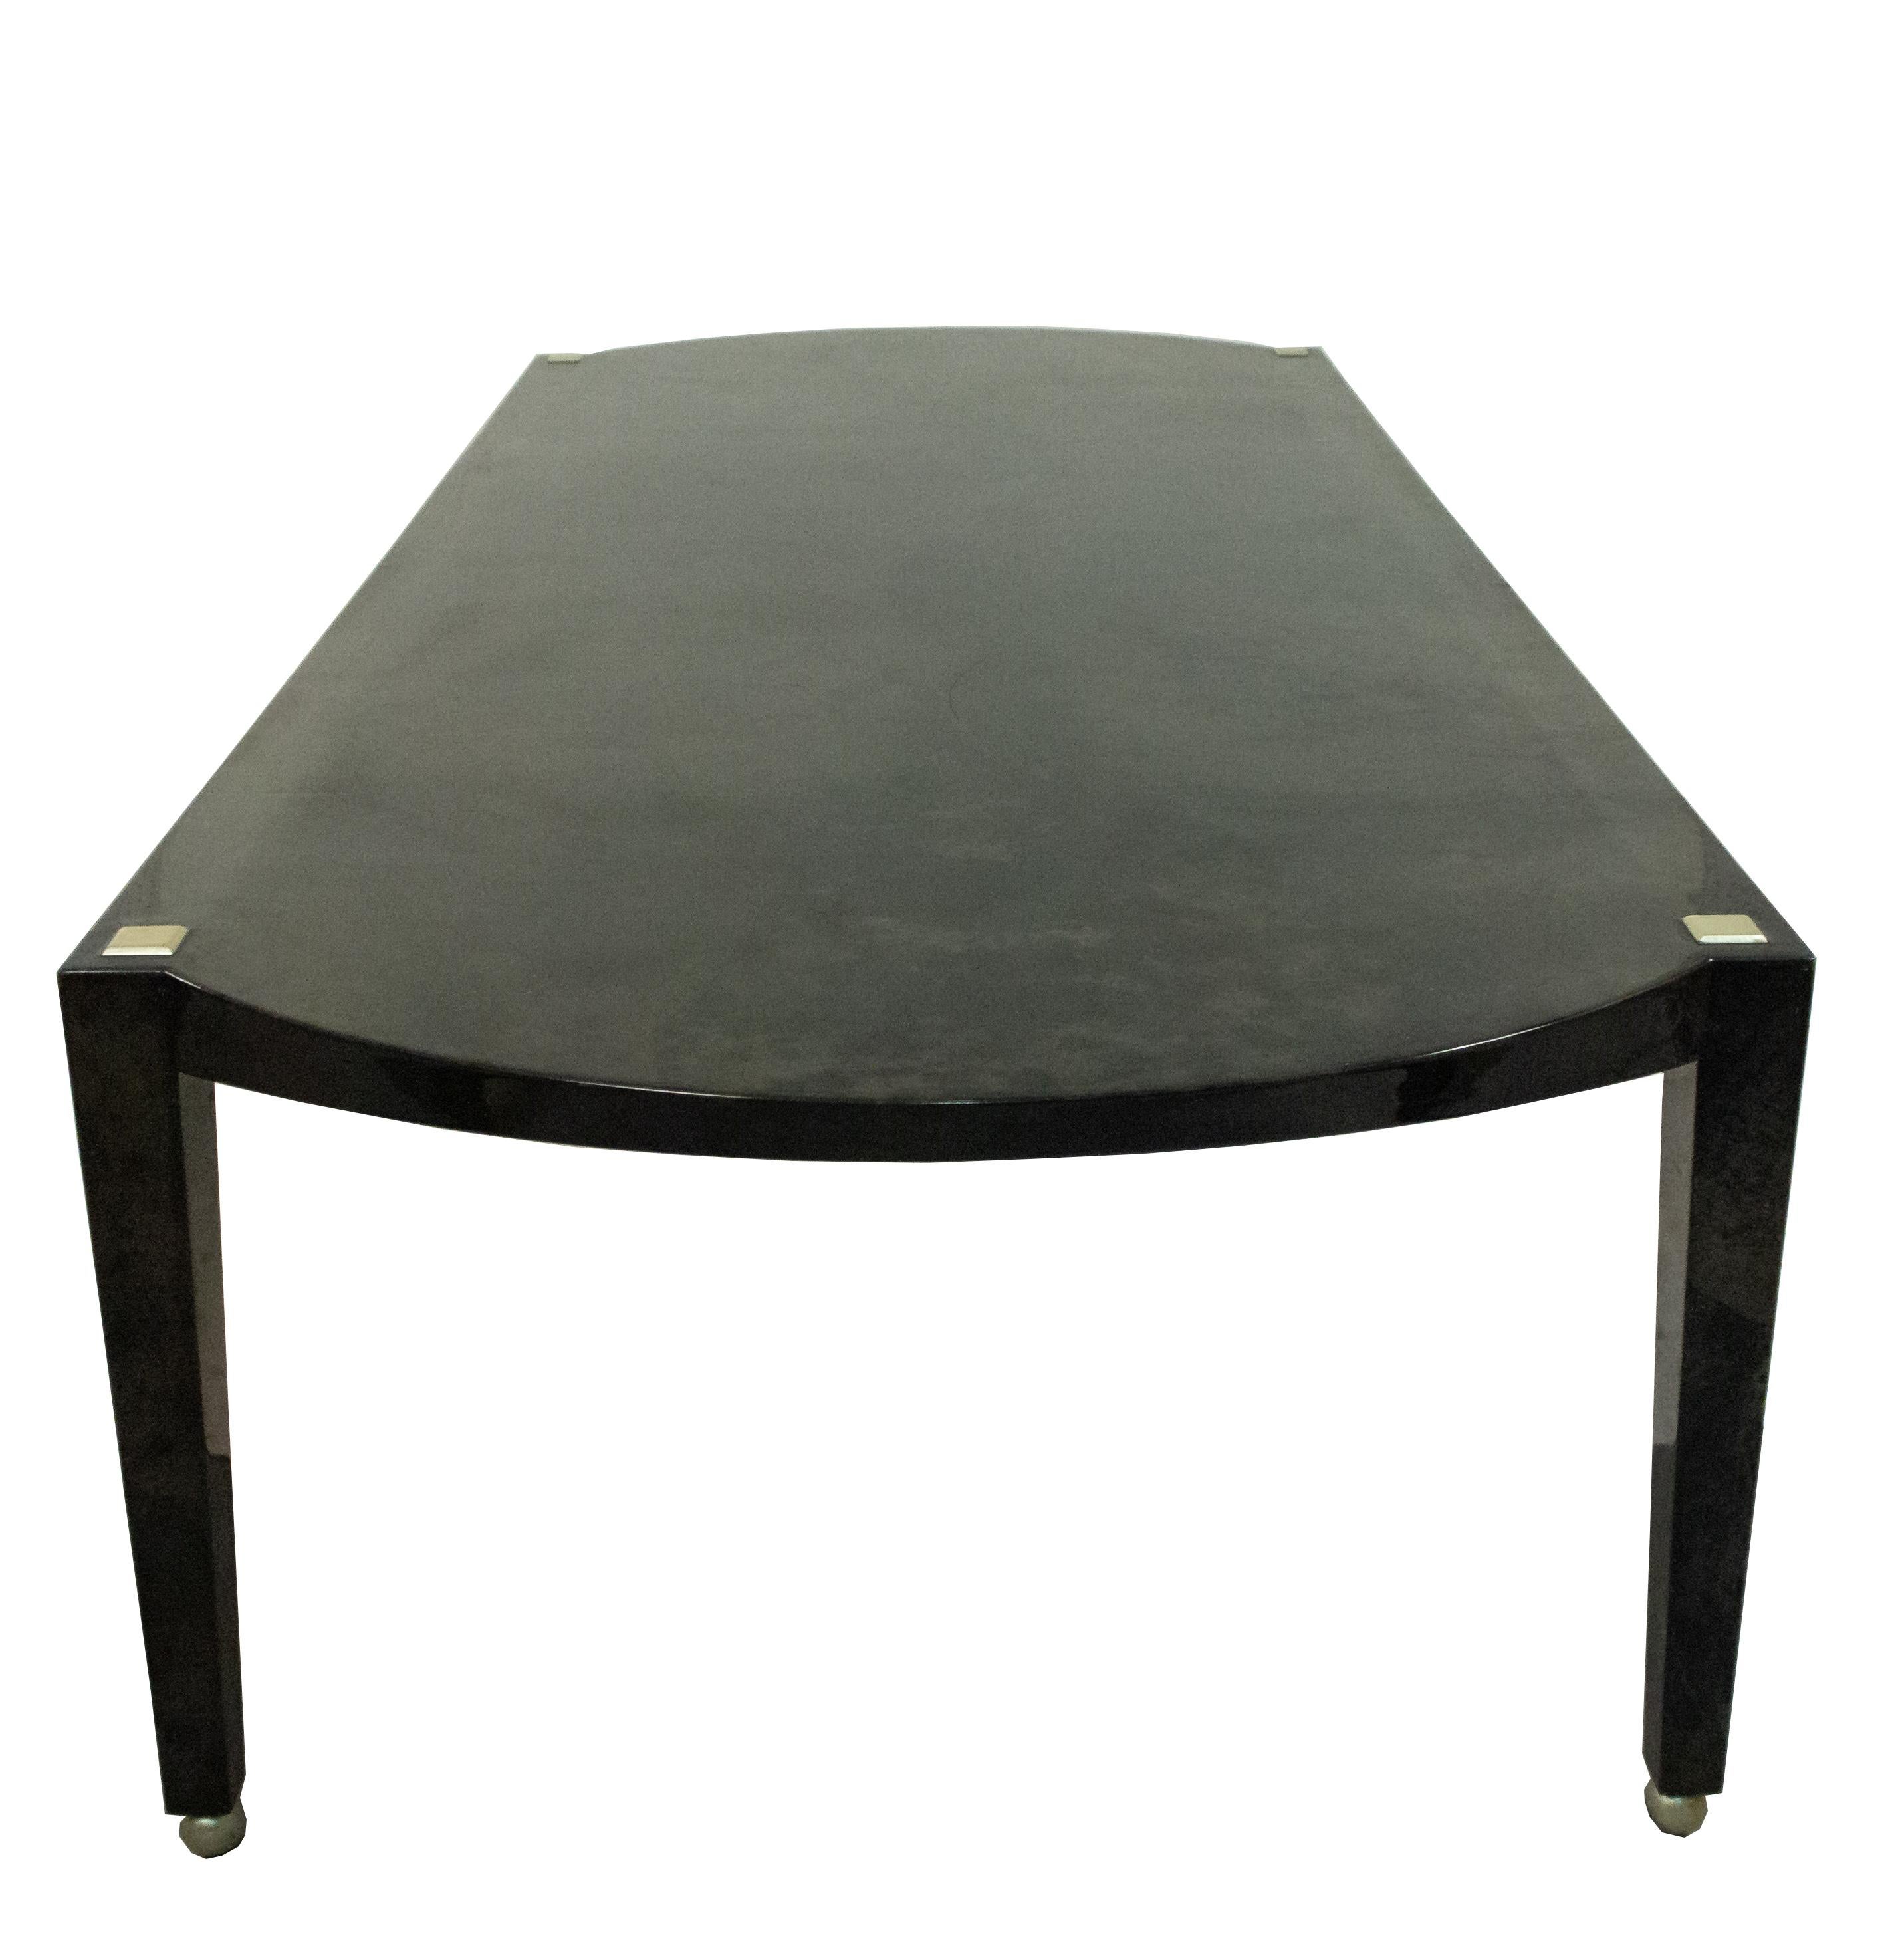 Italian midcentury (1970s-1980s) dark grey parchment and silver leaf trim dining table with rounded ends and supported on 4 black tapered legs.